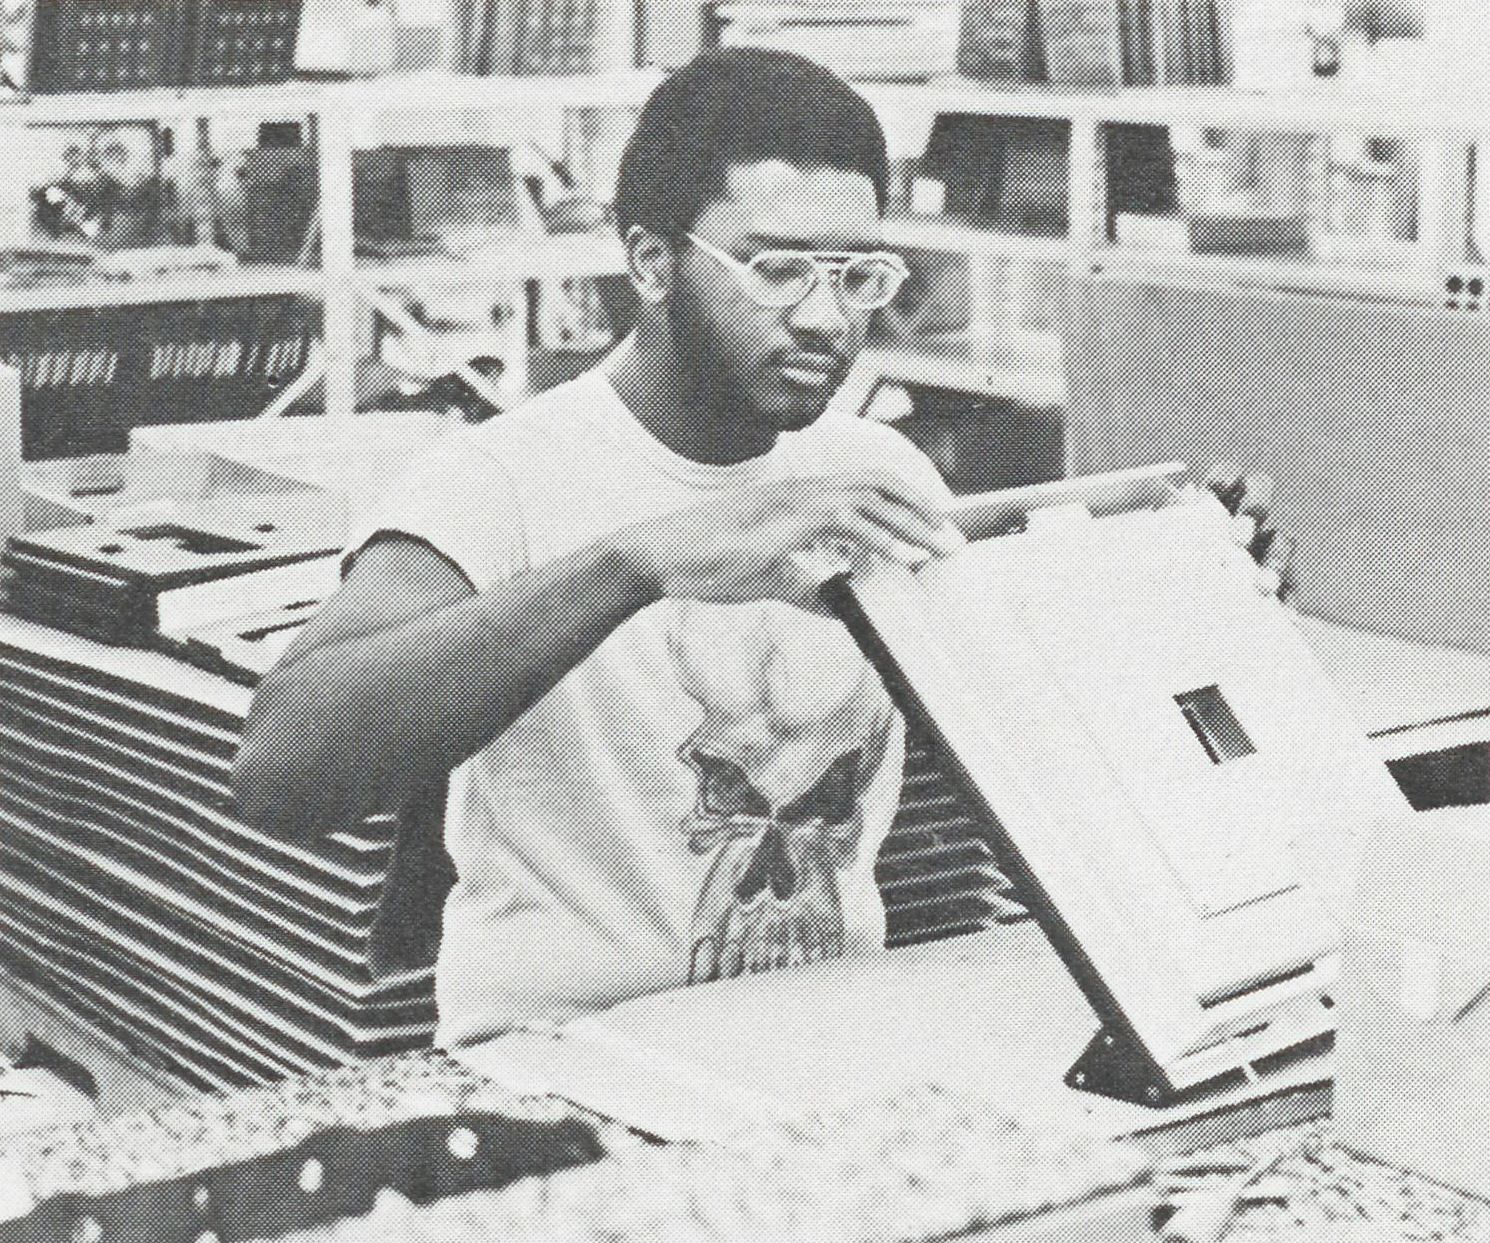 Pettus Hickman working at Hewlett-Packard as part of the FAME program in 1978.